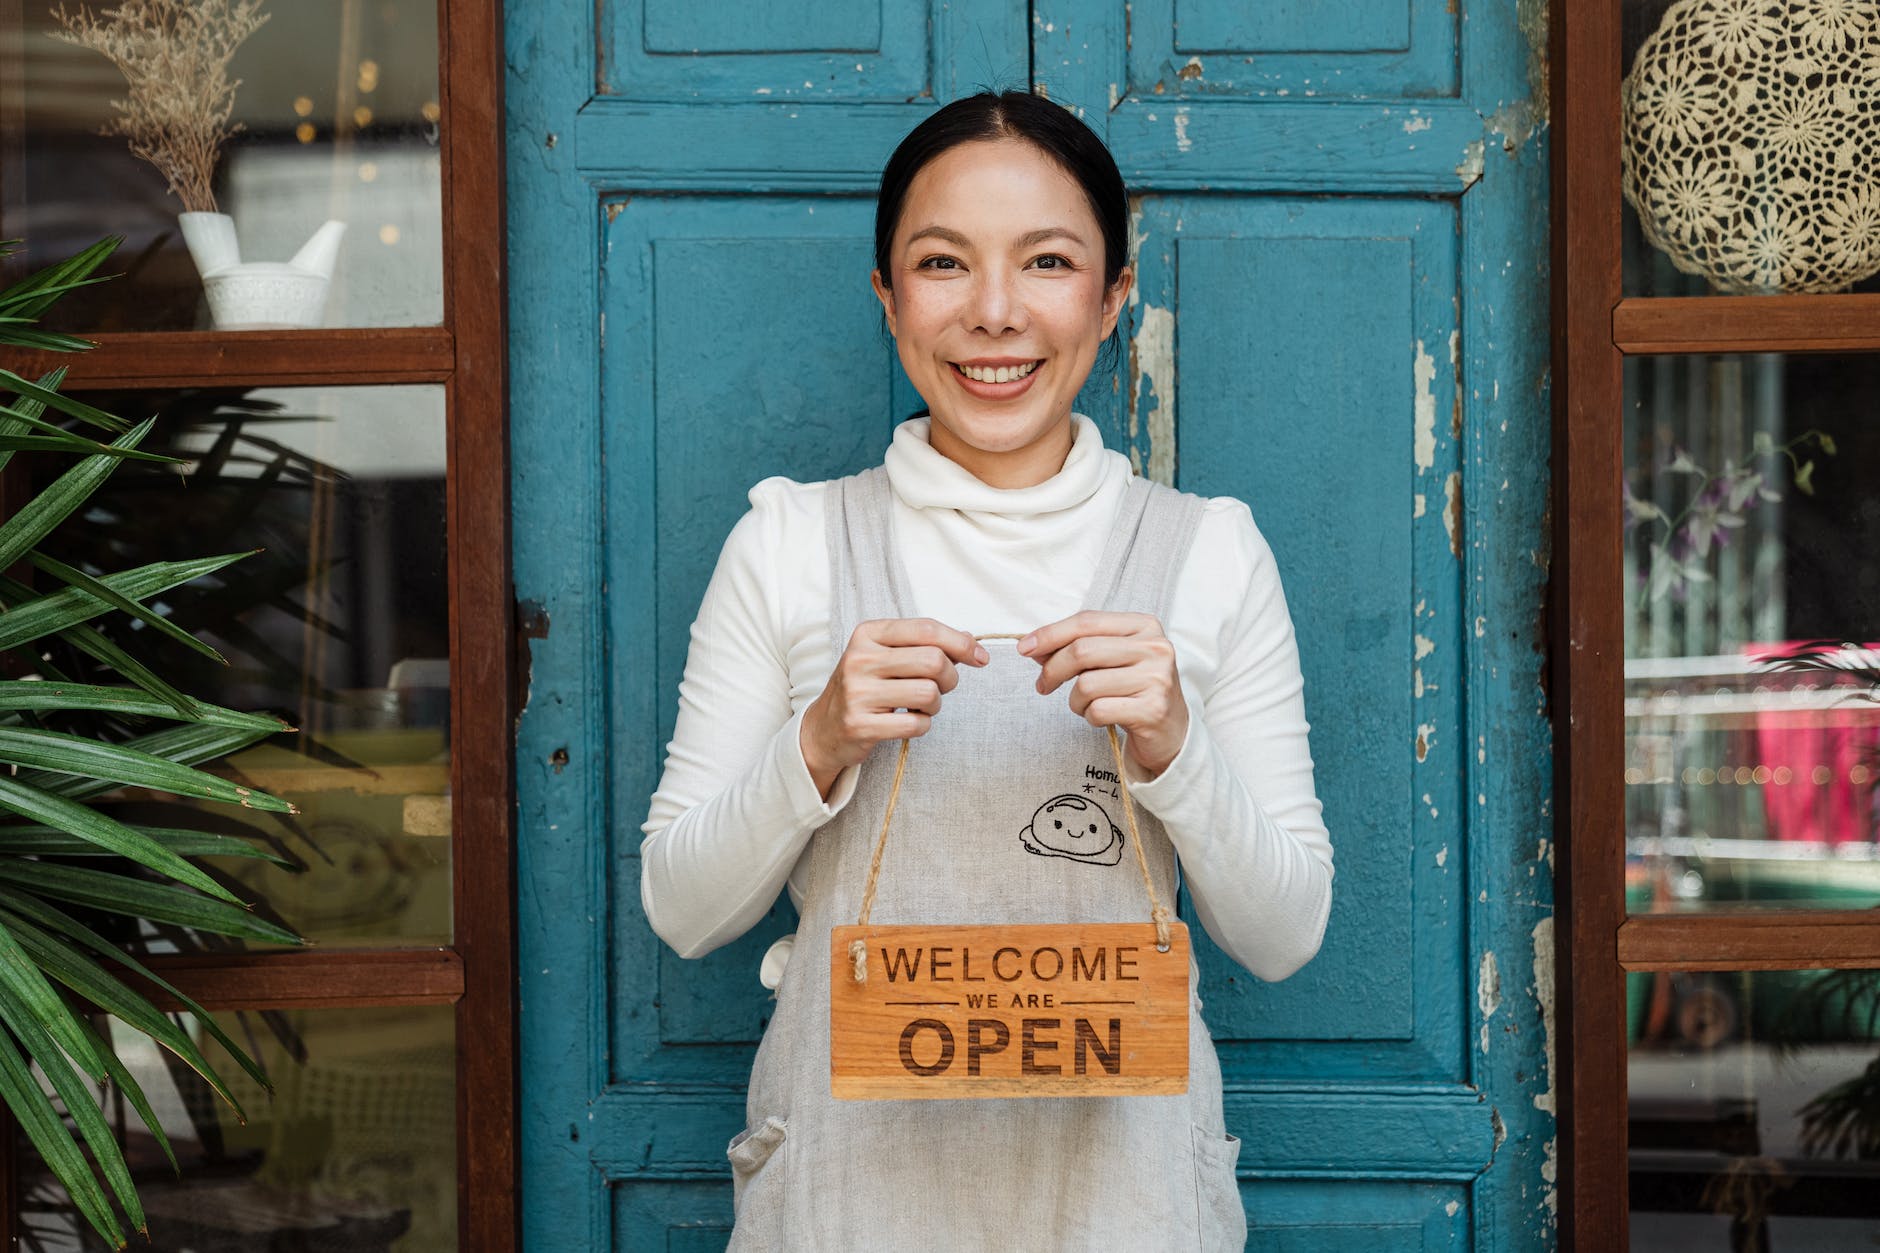 7 Tax Saving Tips & Tricks For Small Business Owners